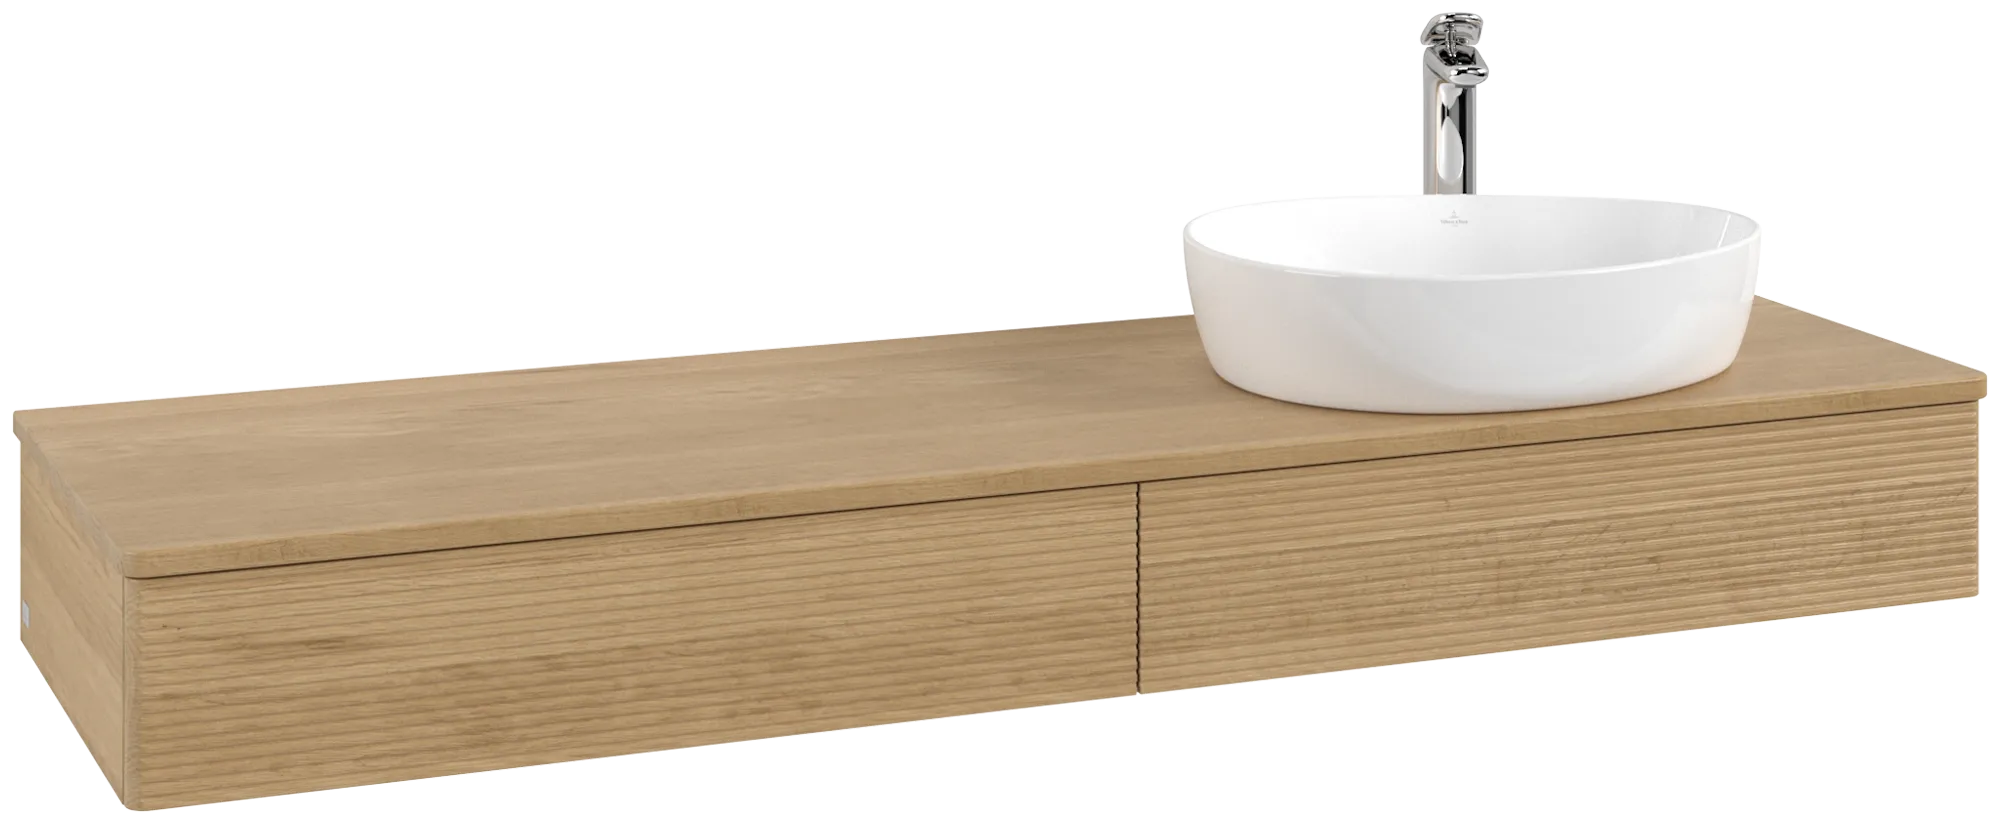 Picture of VILLEROY BOCH Antao Vanity unit, 2 pull-out compartments, 1600 x 190 x 500 mm, Front with grain texture, Honey Oak / Honey Oak #K16151HN